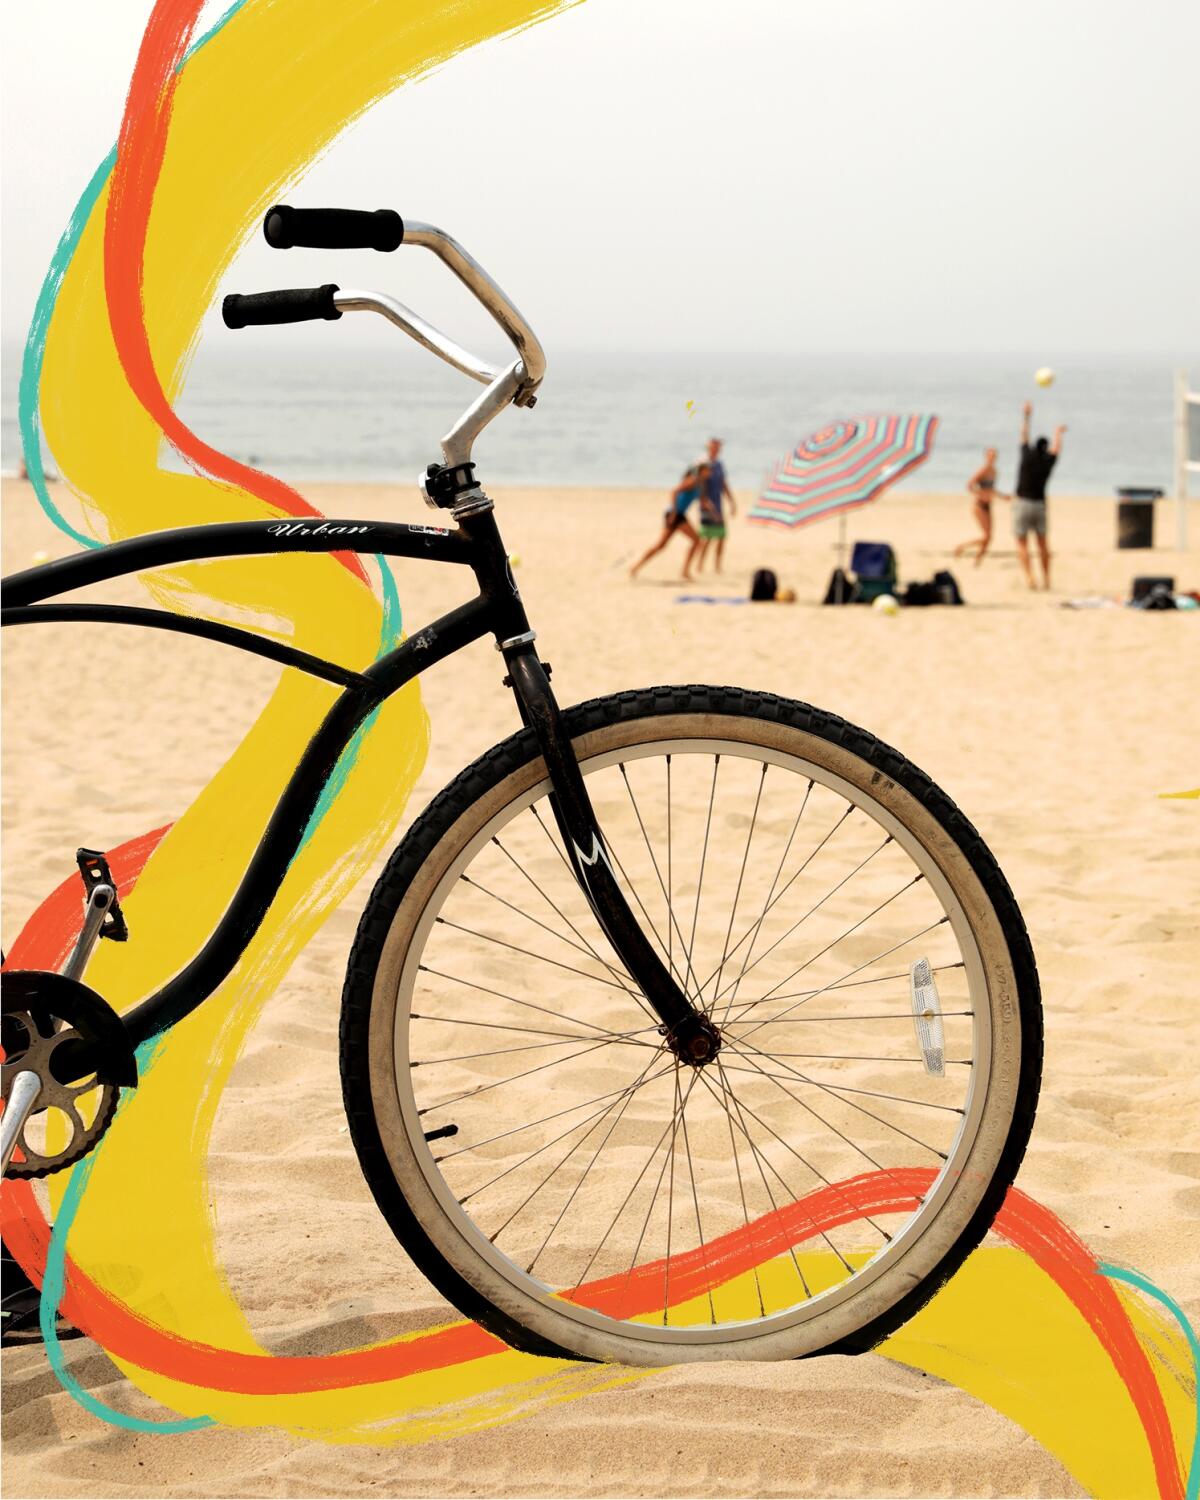 A bicycle on the beach with people playing beach volleyball in the background.